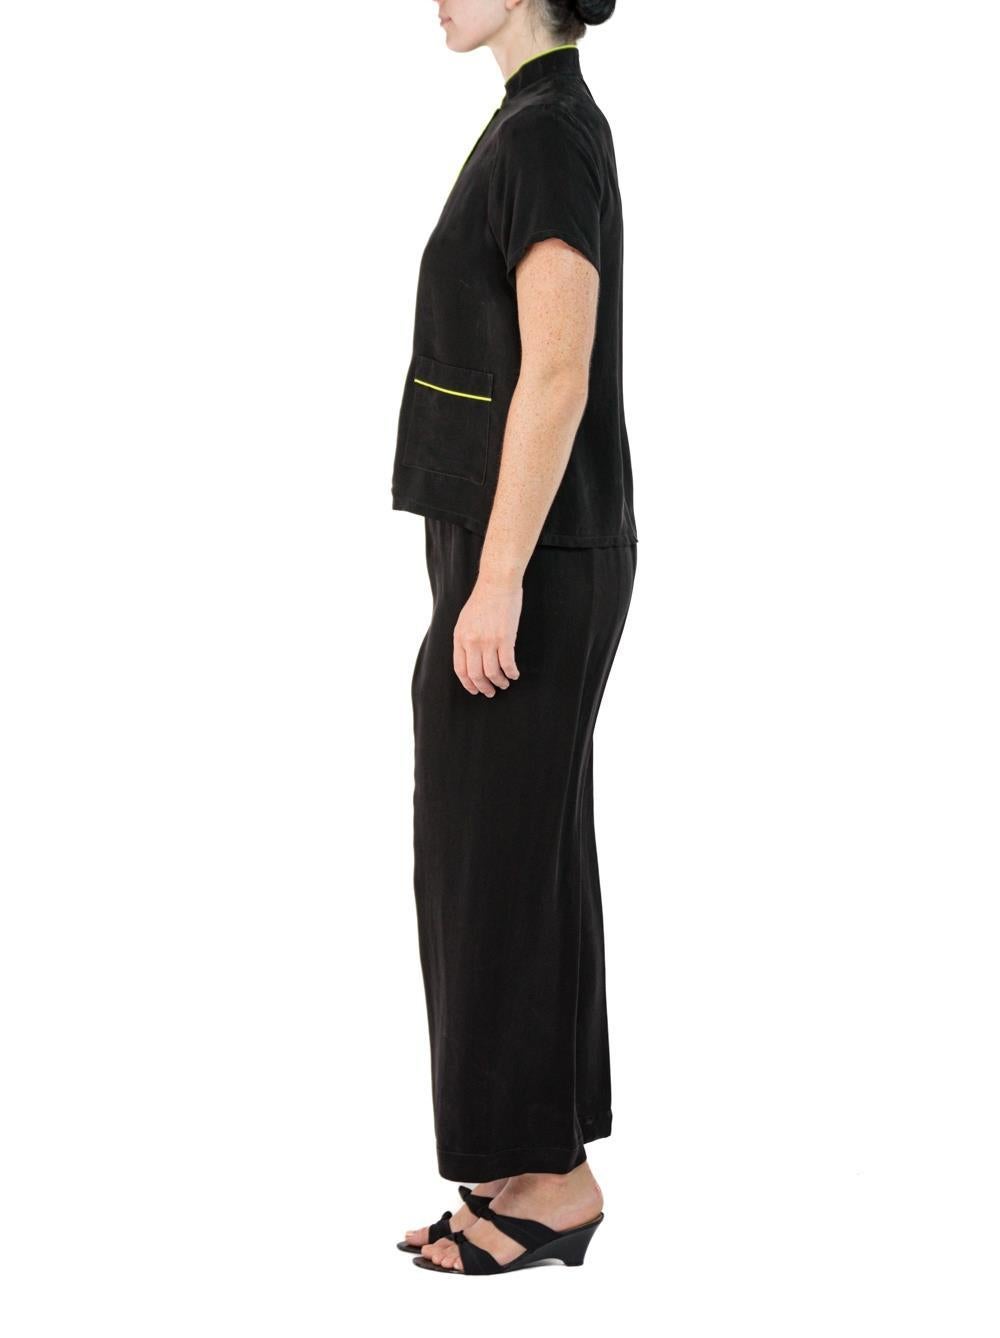 Morphew Collection Black & Neon Yellow Trim Cold Rayon Bias Pajamas Master Medium
MORPHEW COLLECTION is made entirely by hand in our NYC Ateliér of rare antique materials sourced from around the globe. Our sustainable vintage materials represent